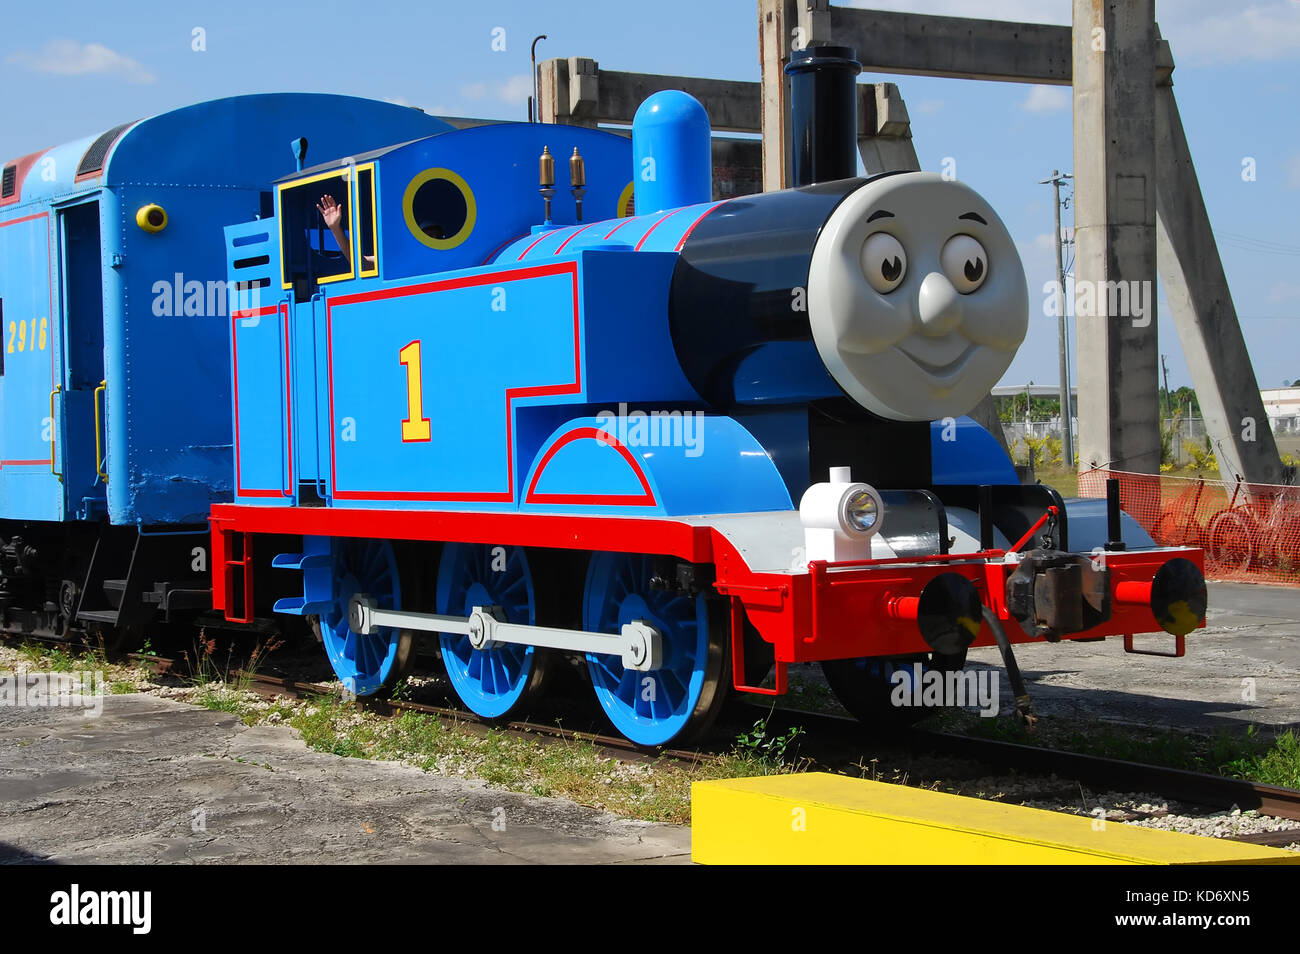 Miami, USA - March 10, 2007: Thomas The Tank engine character reenactment visiting Miami. This is a popular childens Tv and book character Stock Photo